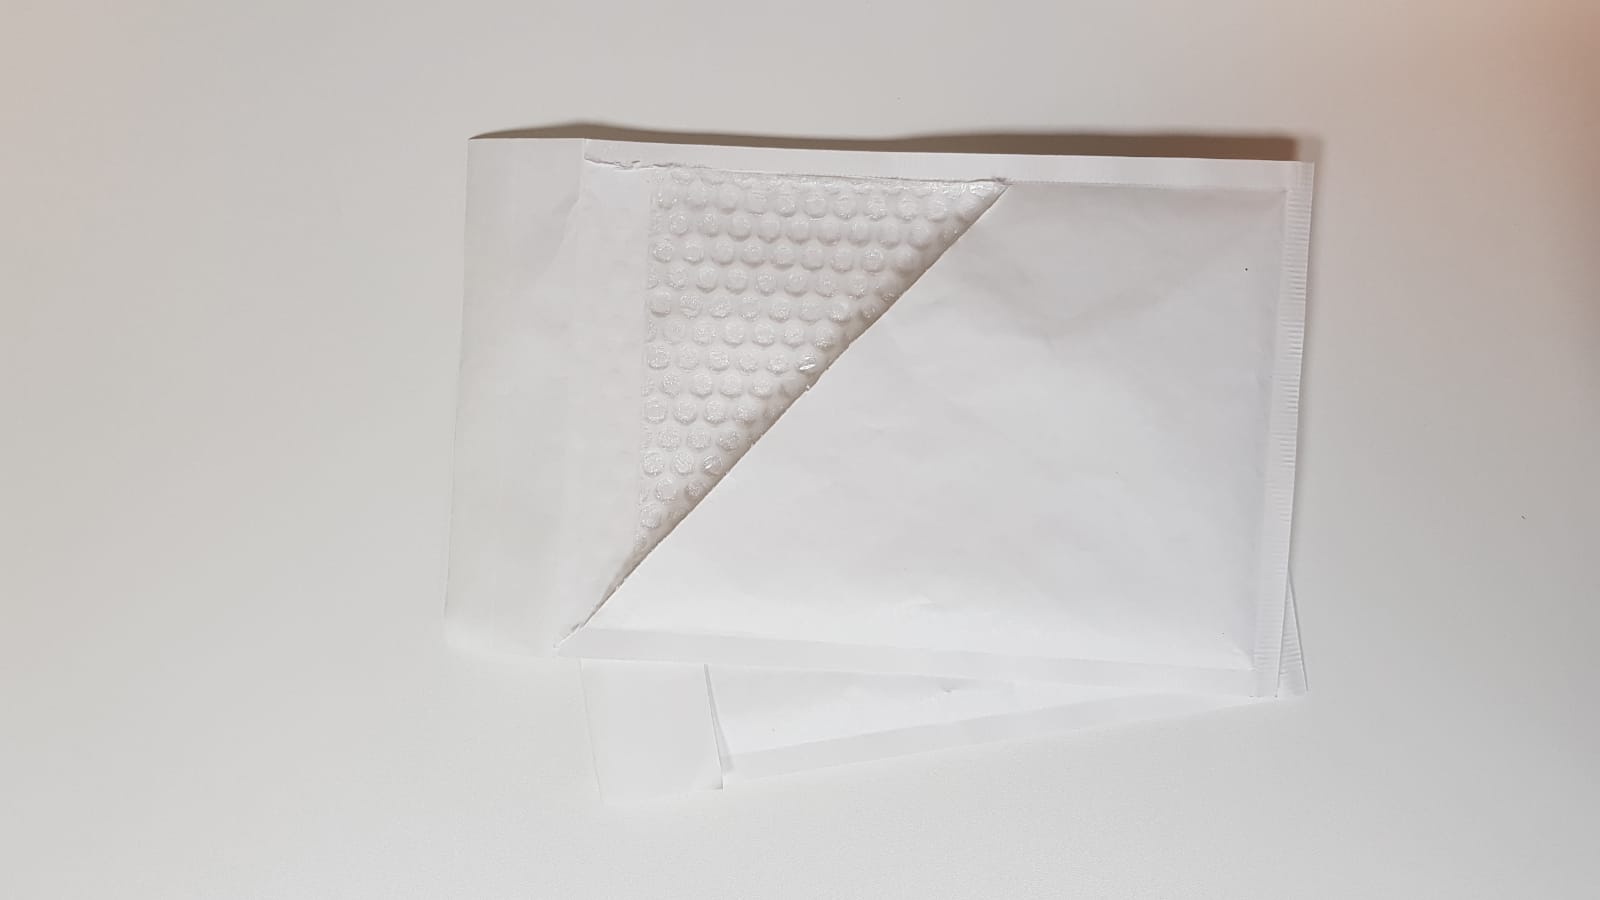 Padded bag 100 X 160mm (and various sizes) - Airship White Peel & Seal Padded Bags